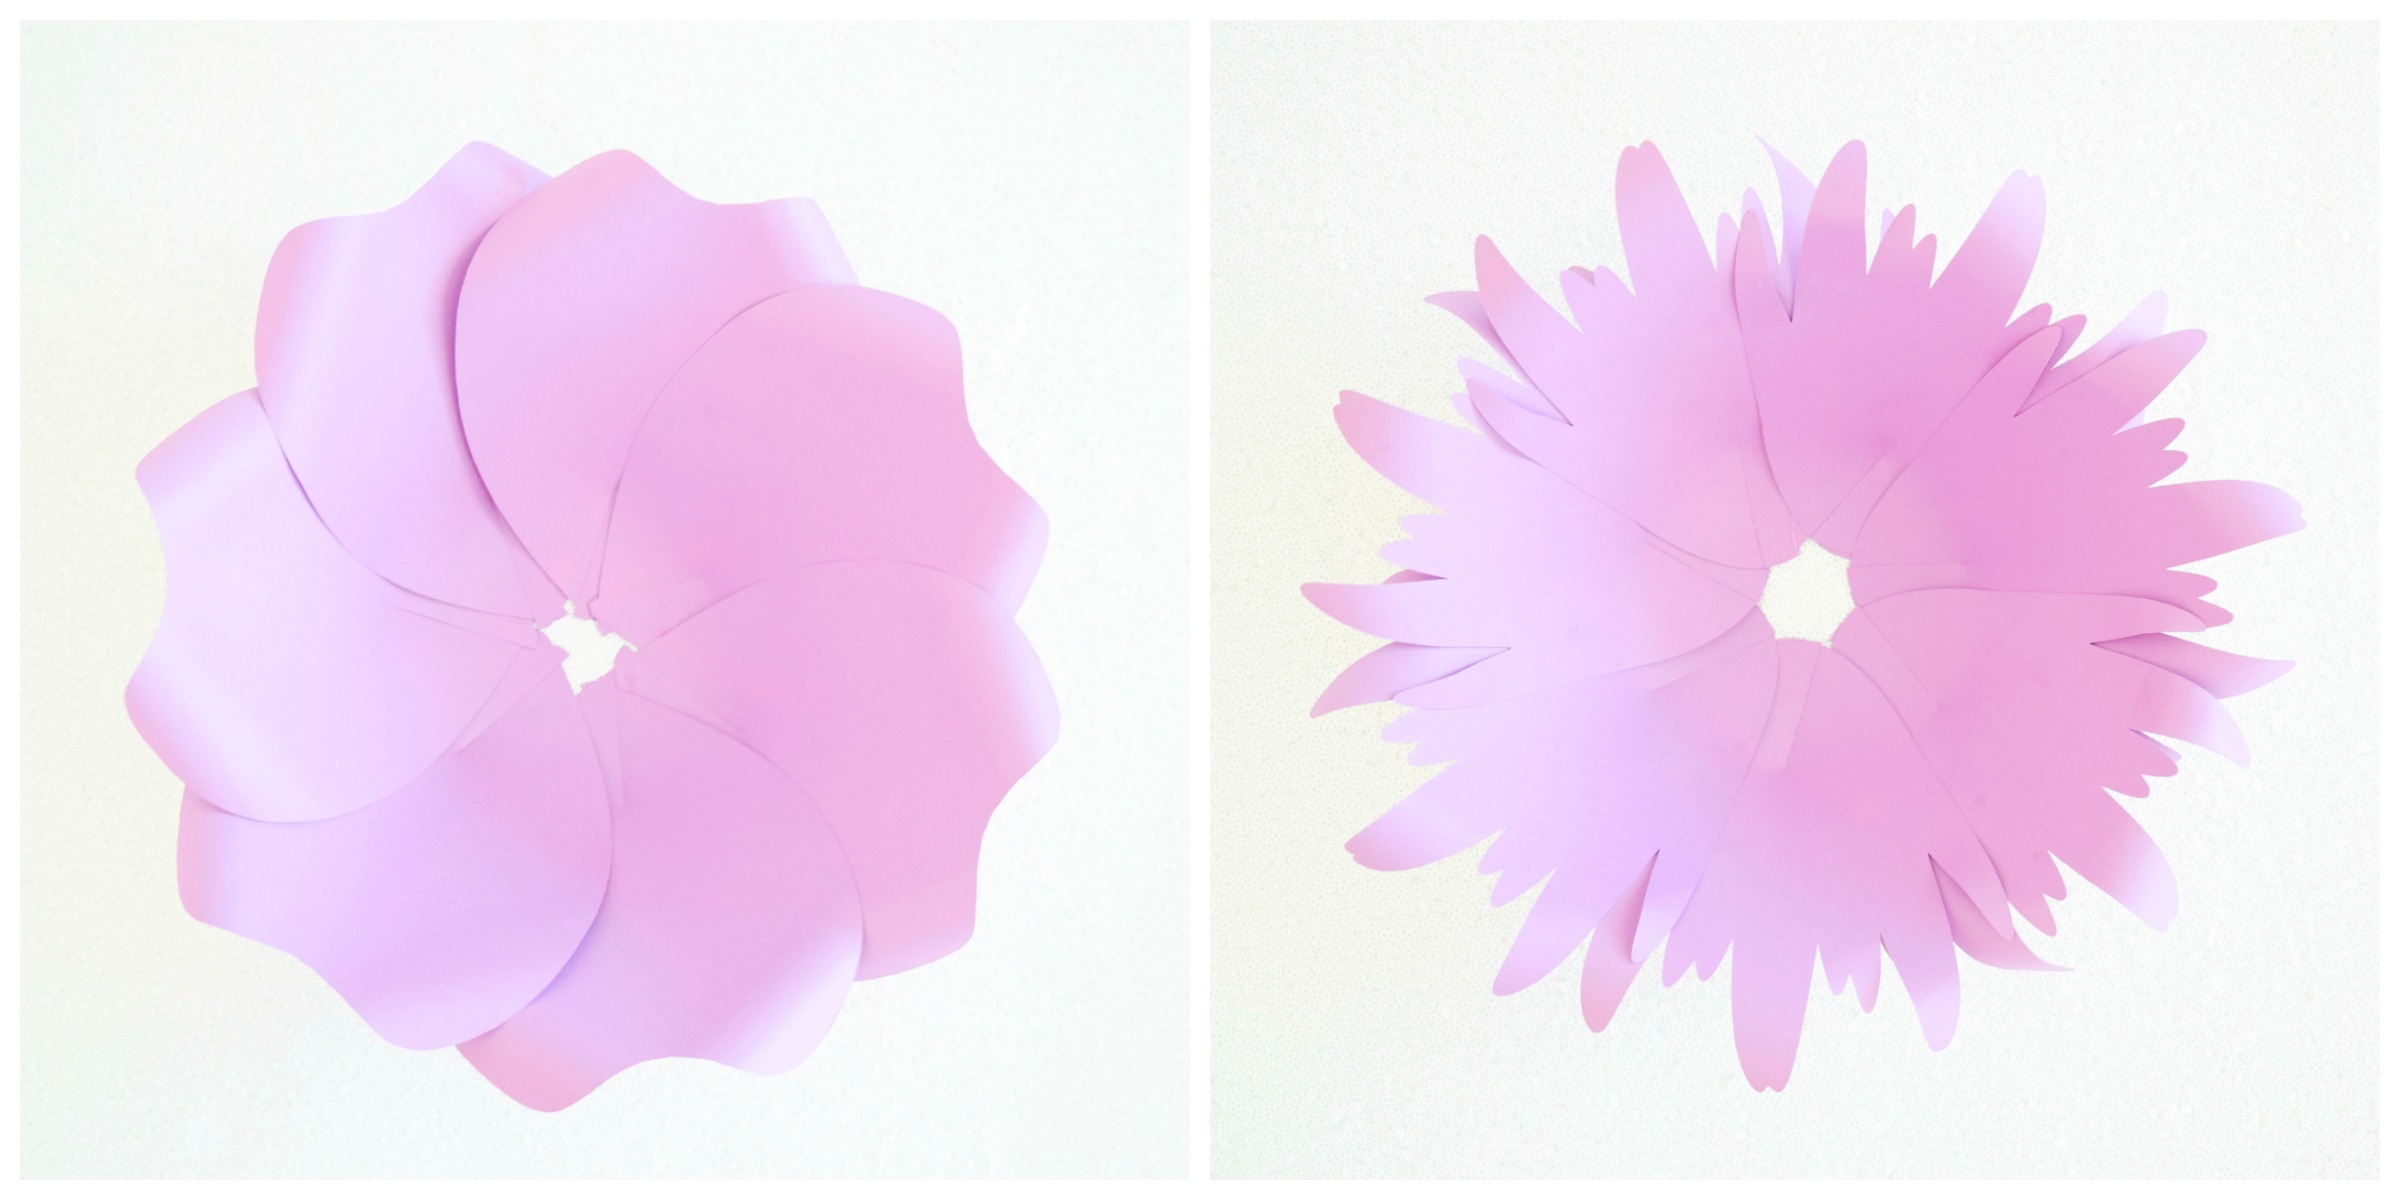 Two side by side images show how to make a paper dress skirt using two different size purple paper flower petals.